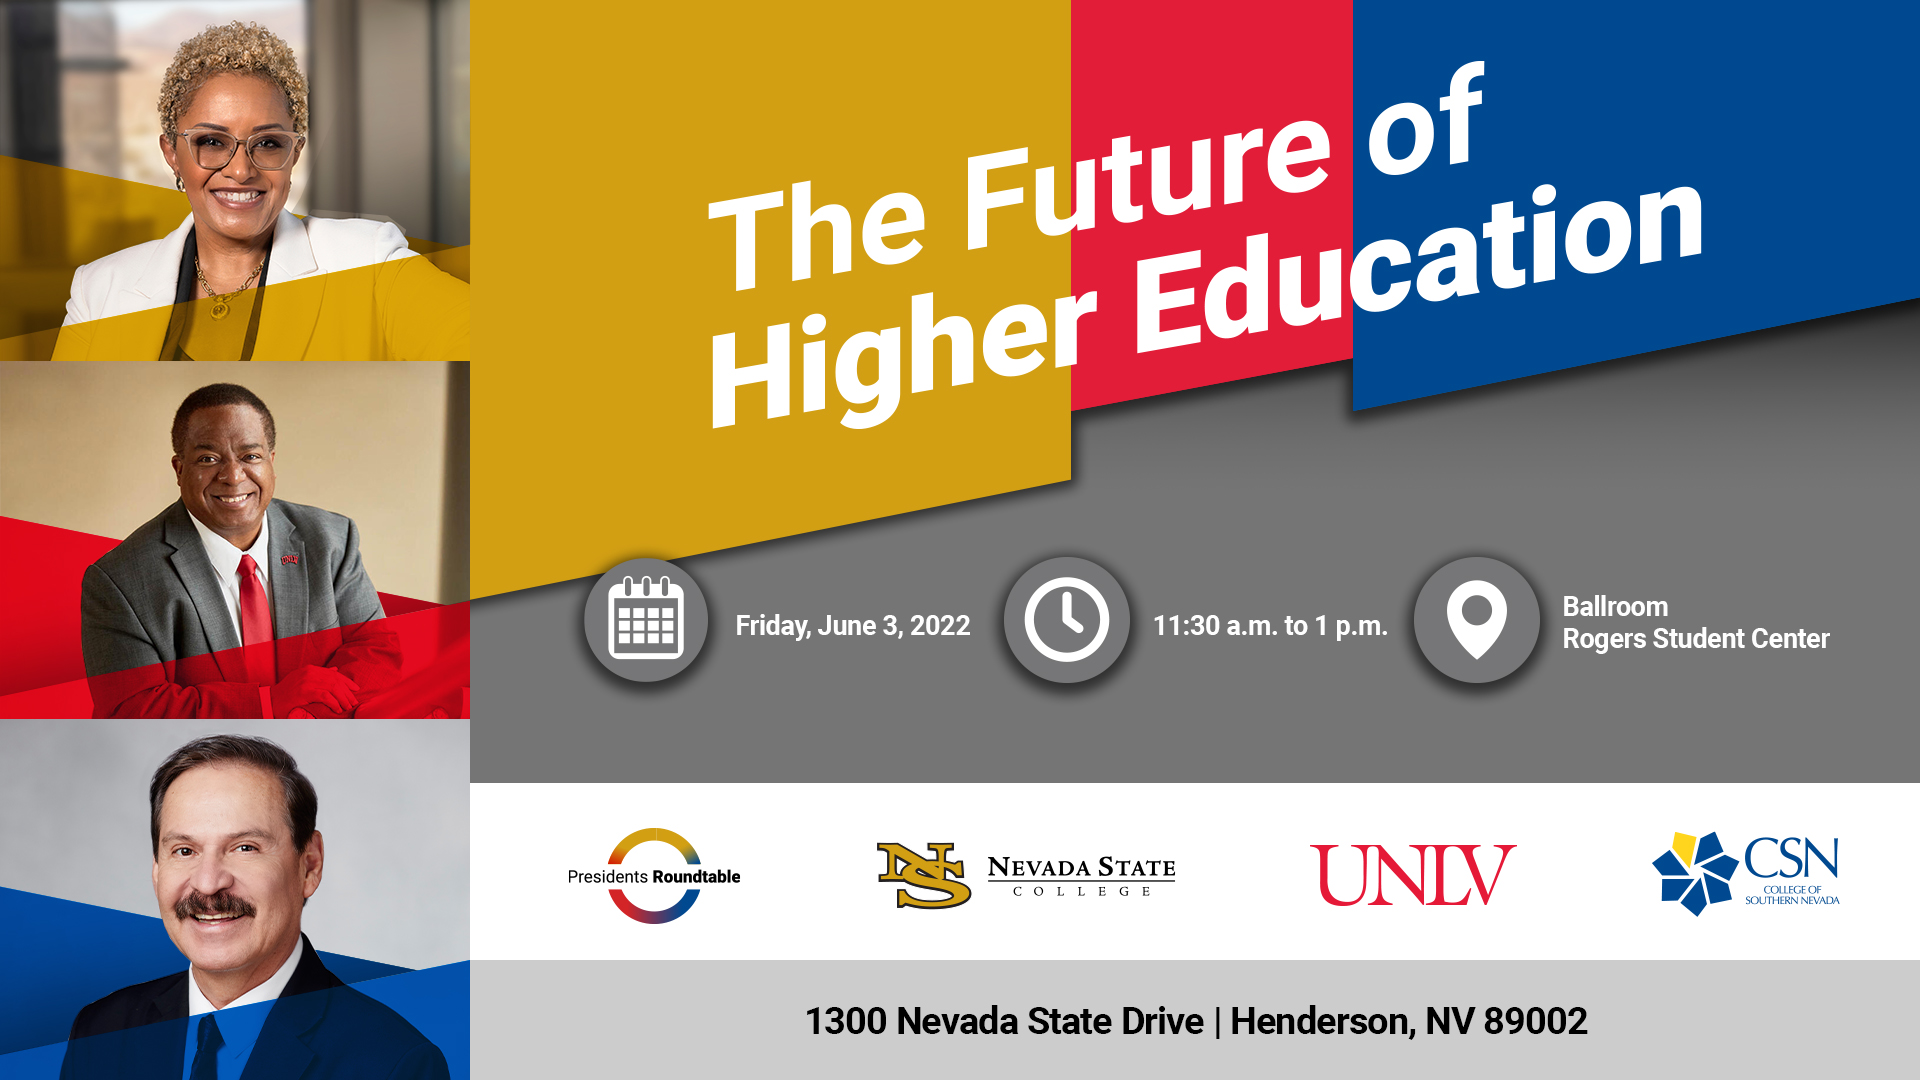 The Future Of Higher Education Poster